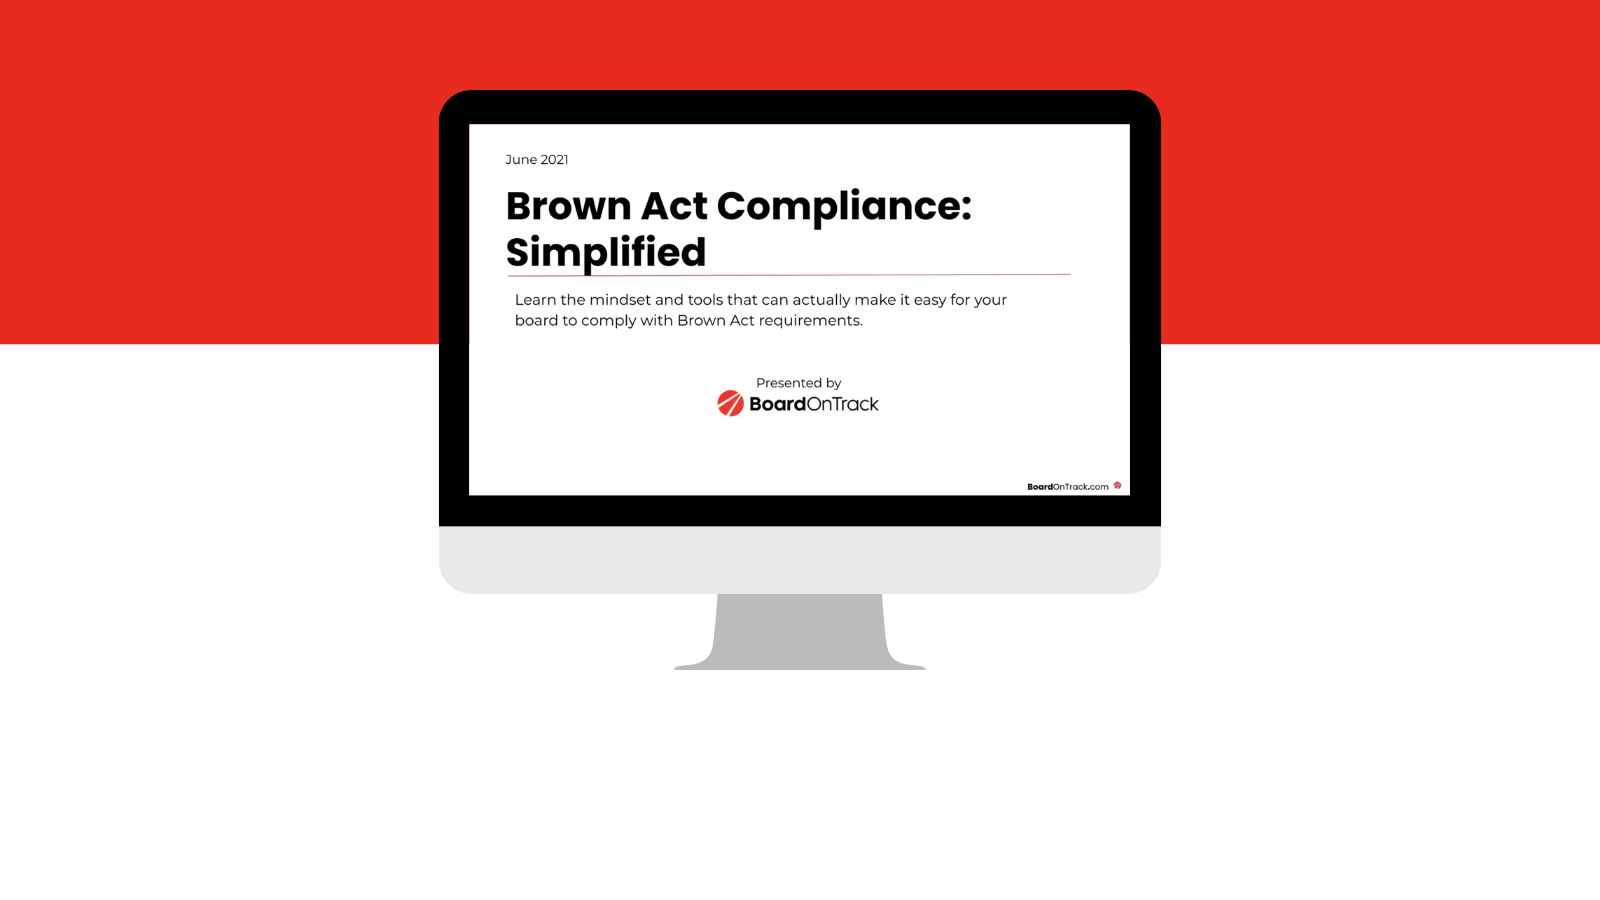 Brown Act Compliance: Simplified